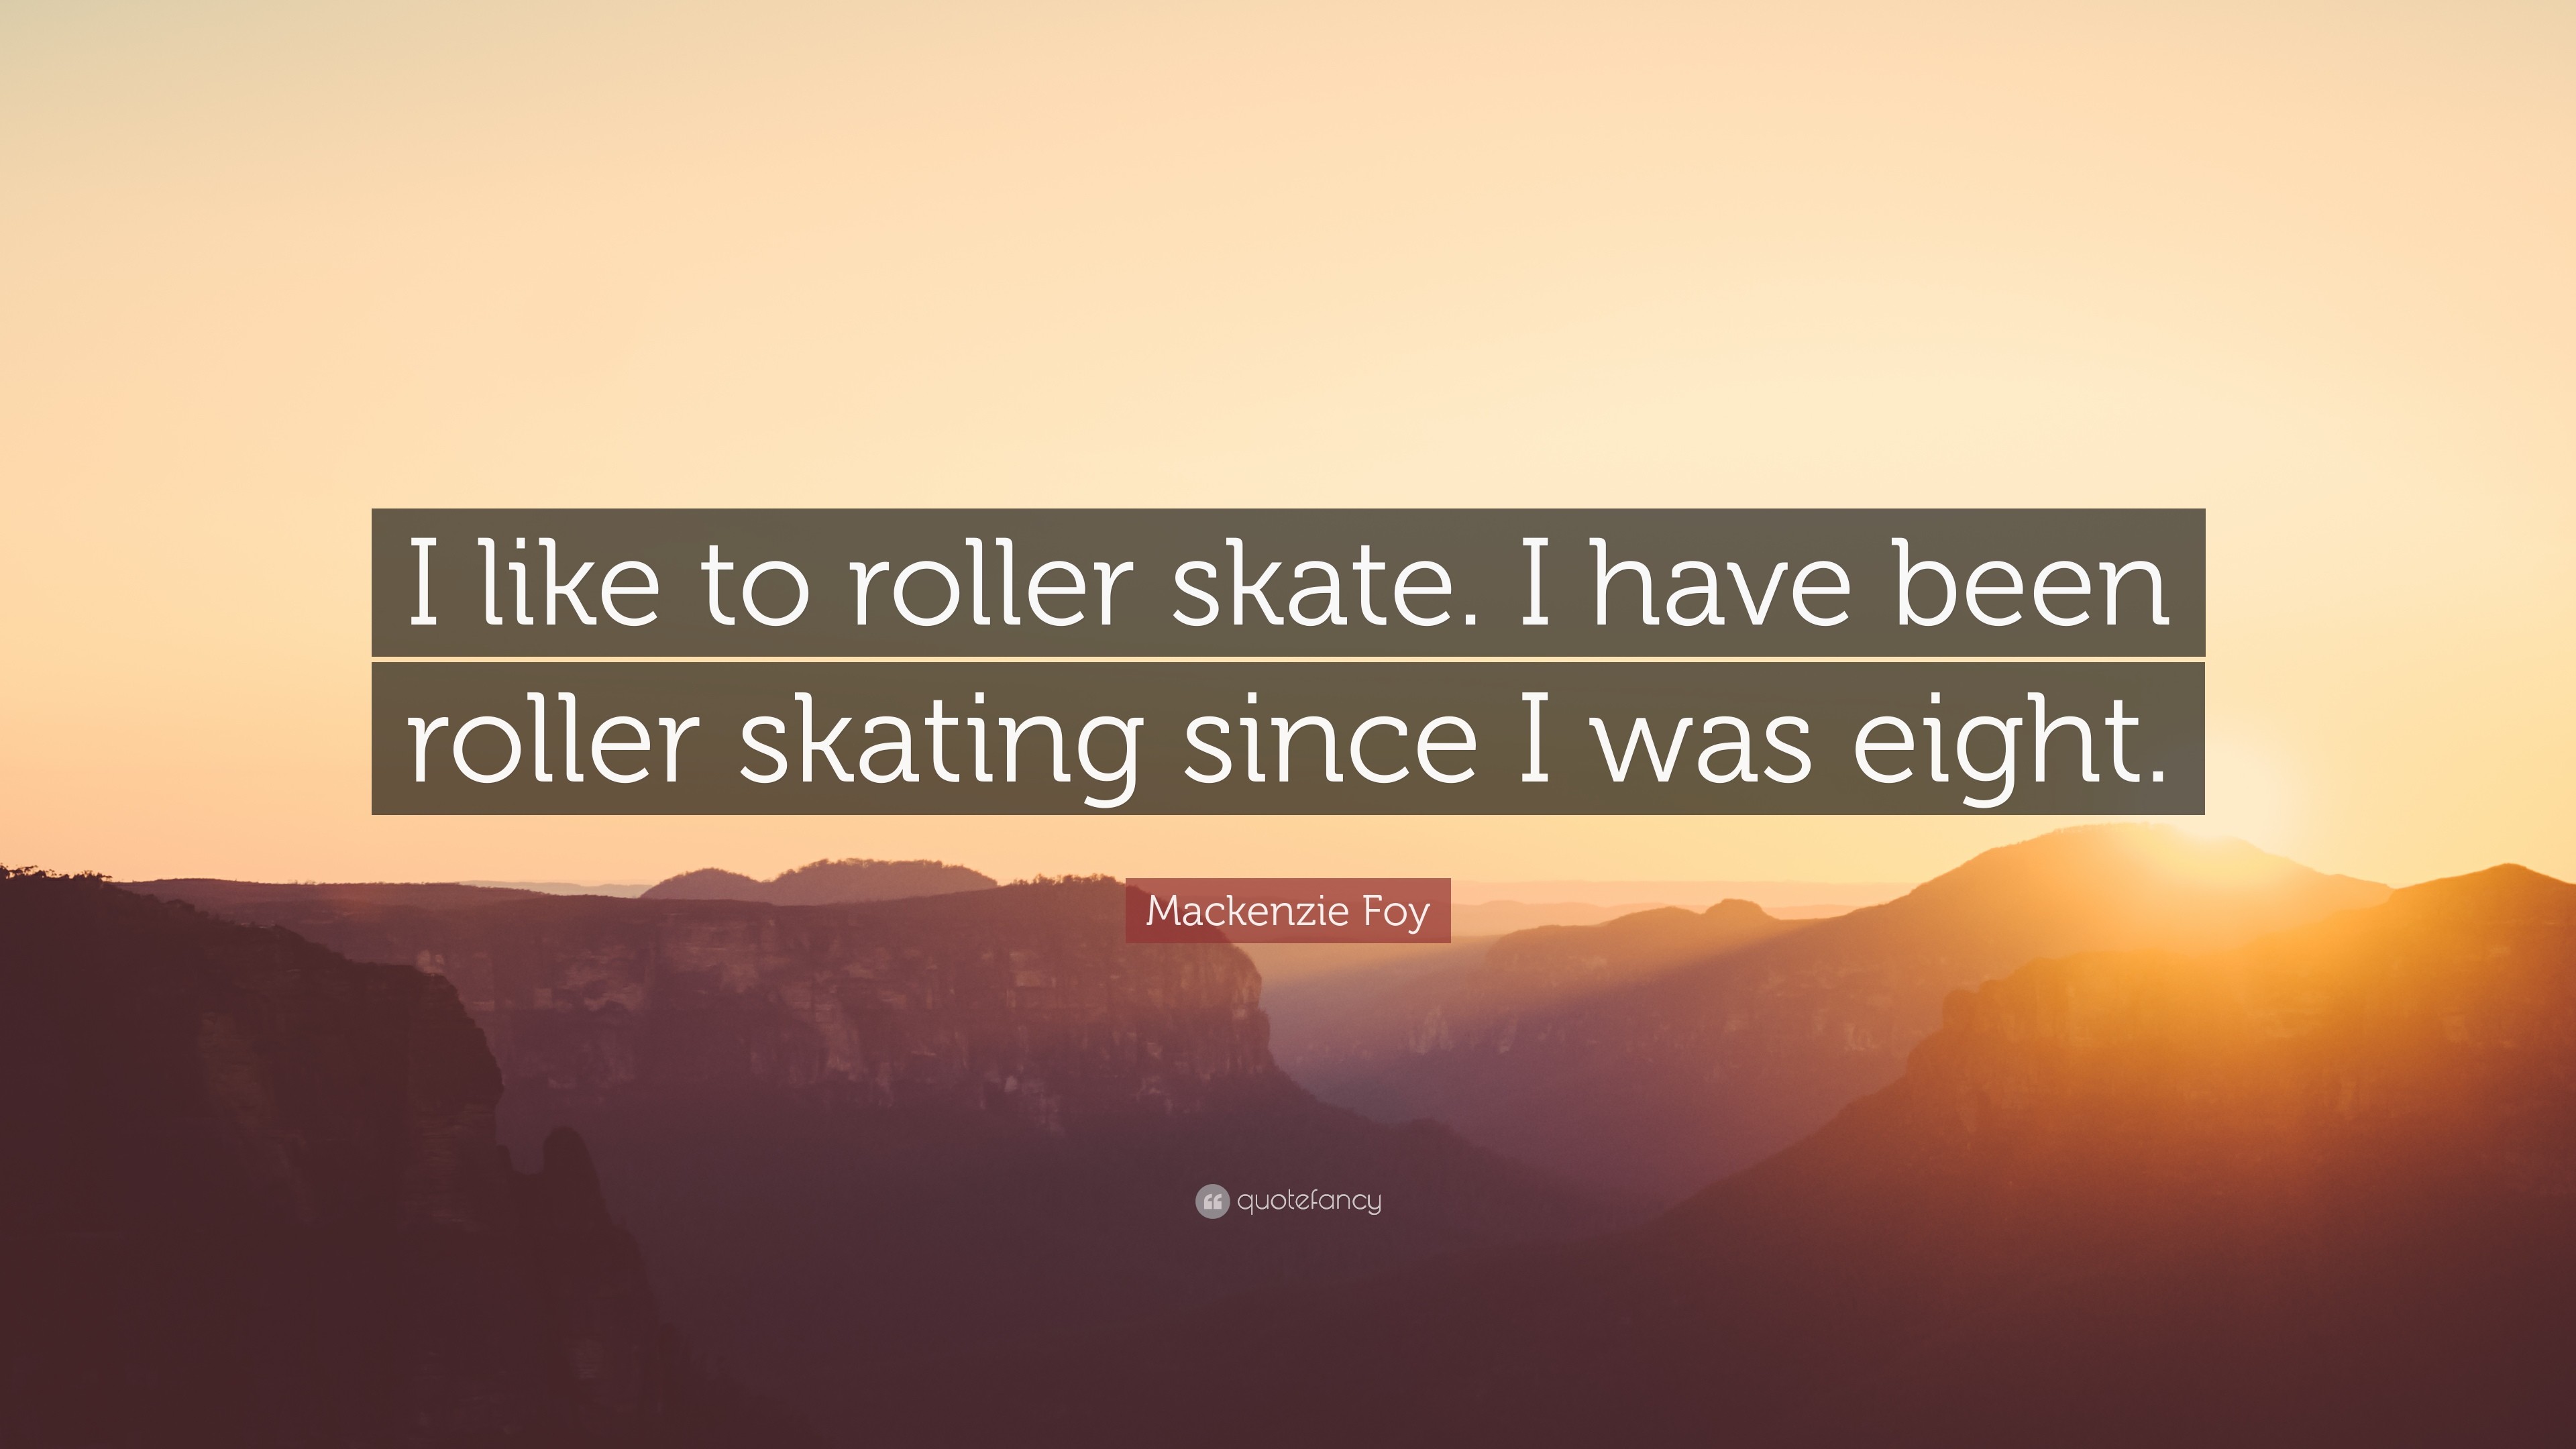 3840x2160 Mackenzie Foy Quote: “I like to roller skate. I have been roller skating